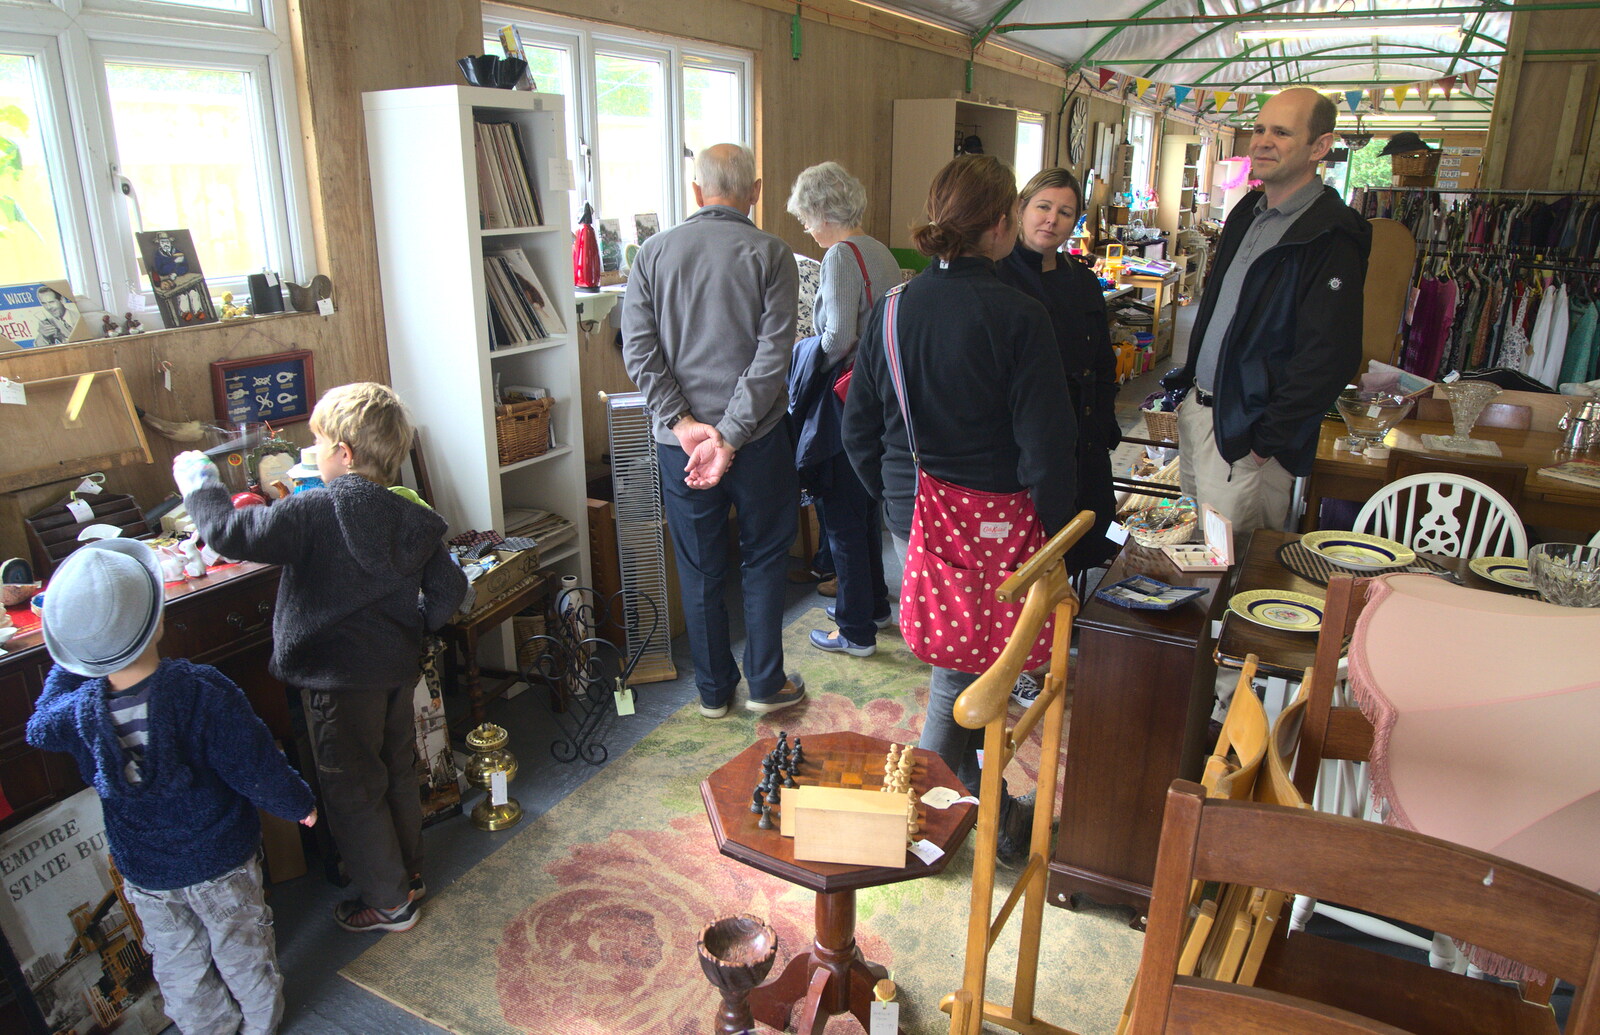 There's quite a throng in Michelle's shop from Camping at Roundhills, Brockenhurst, New Forest, Hampshire - 29th August 2015